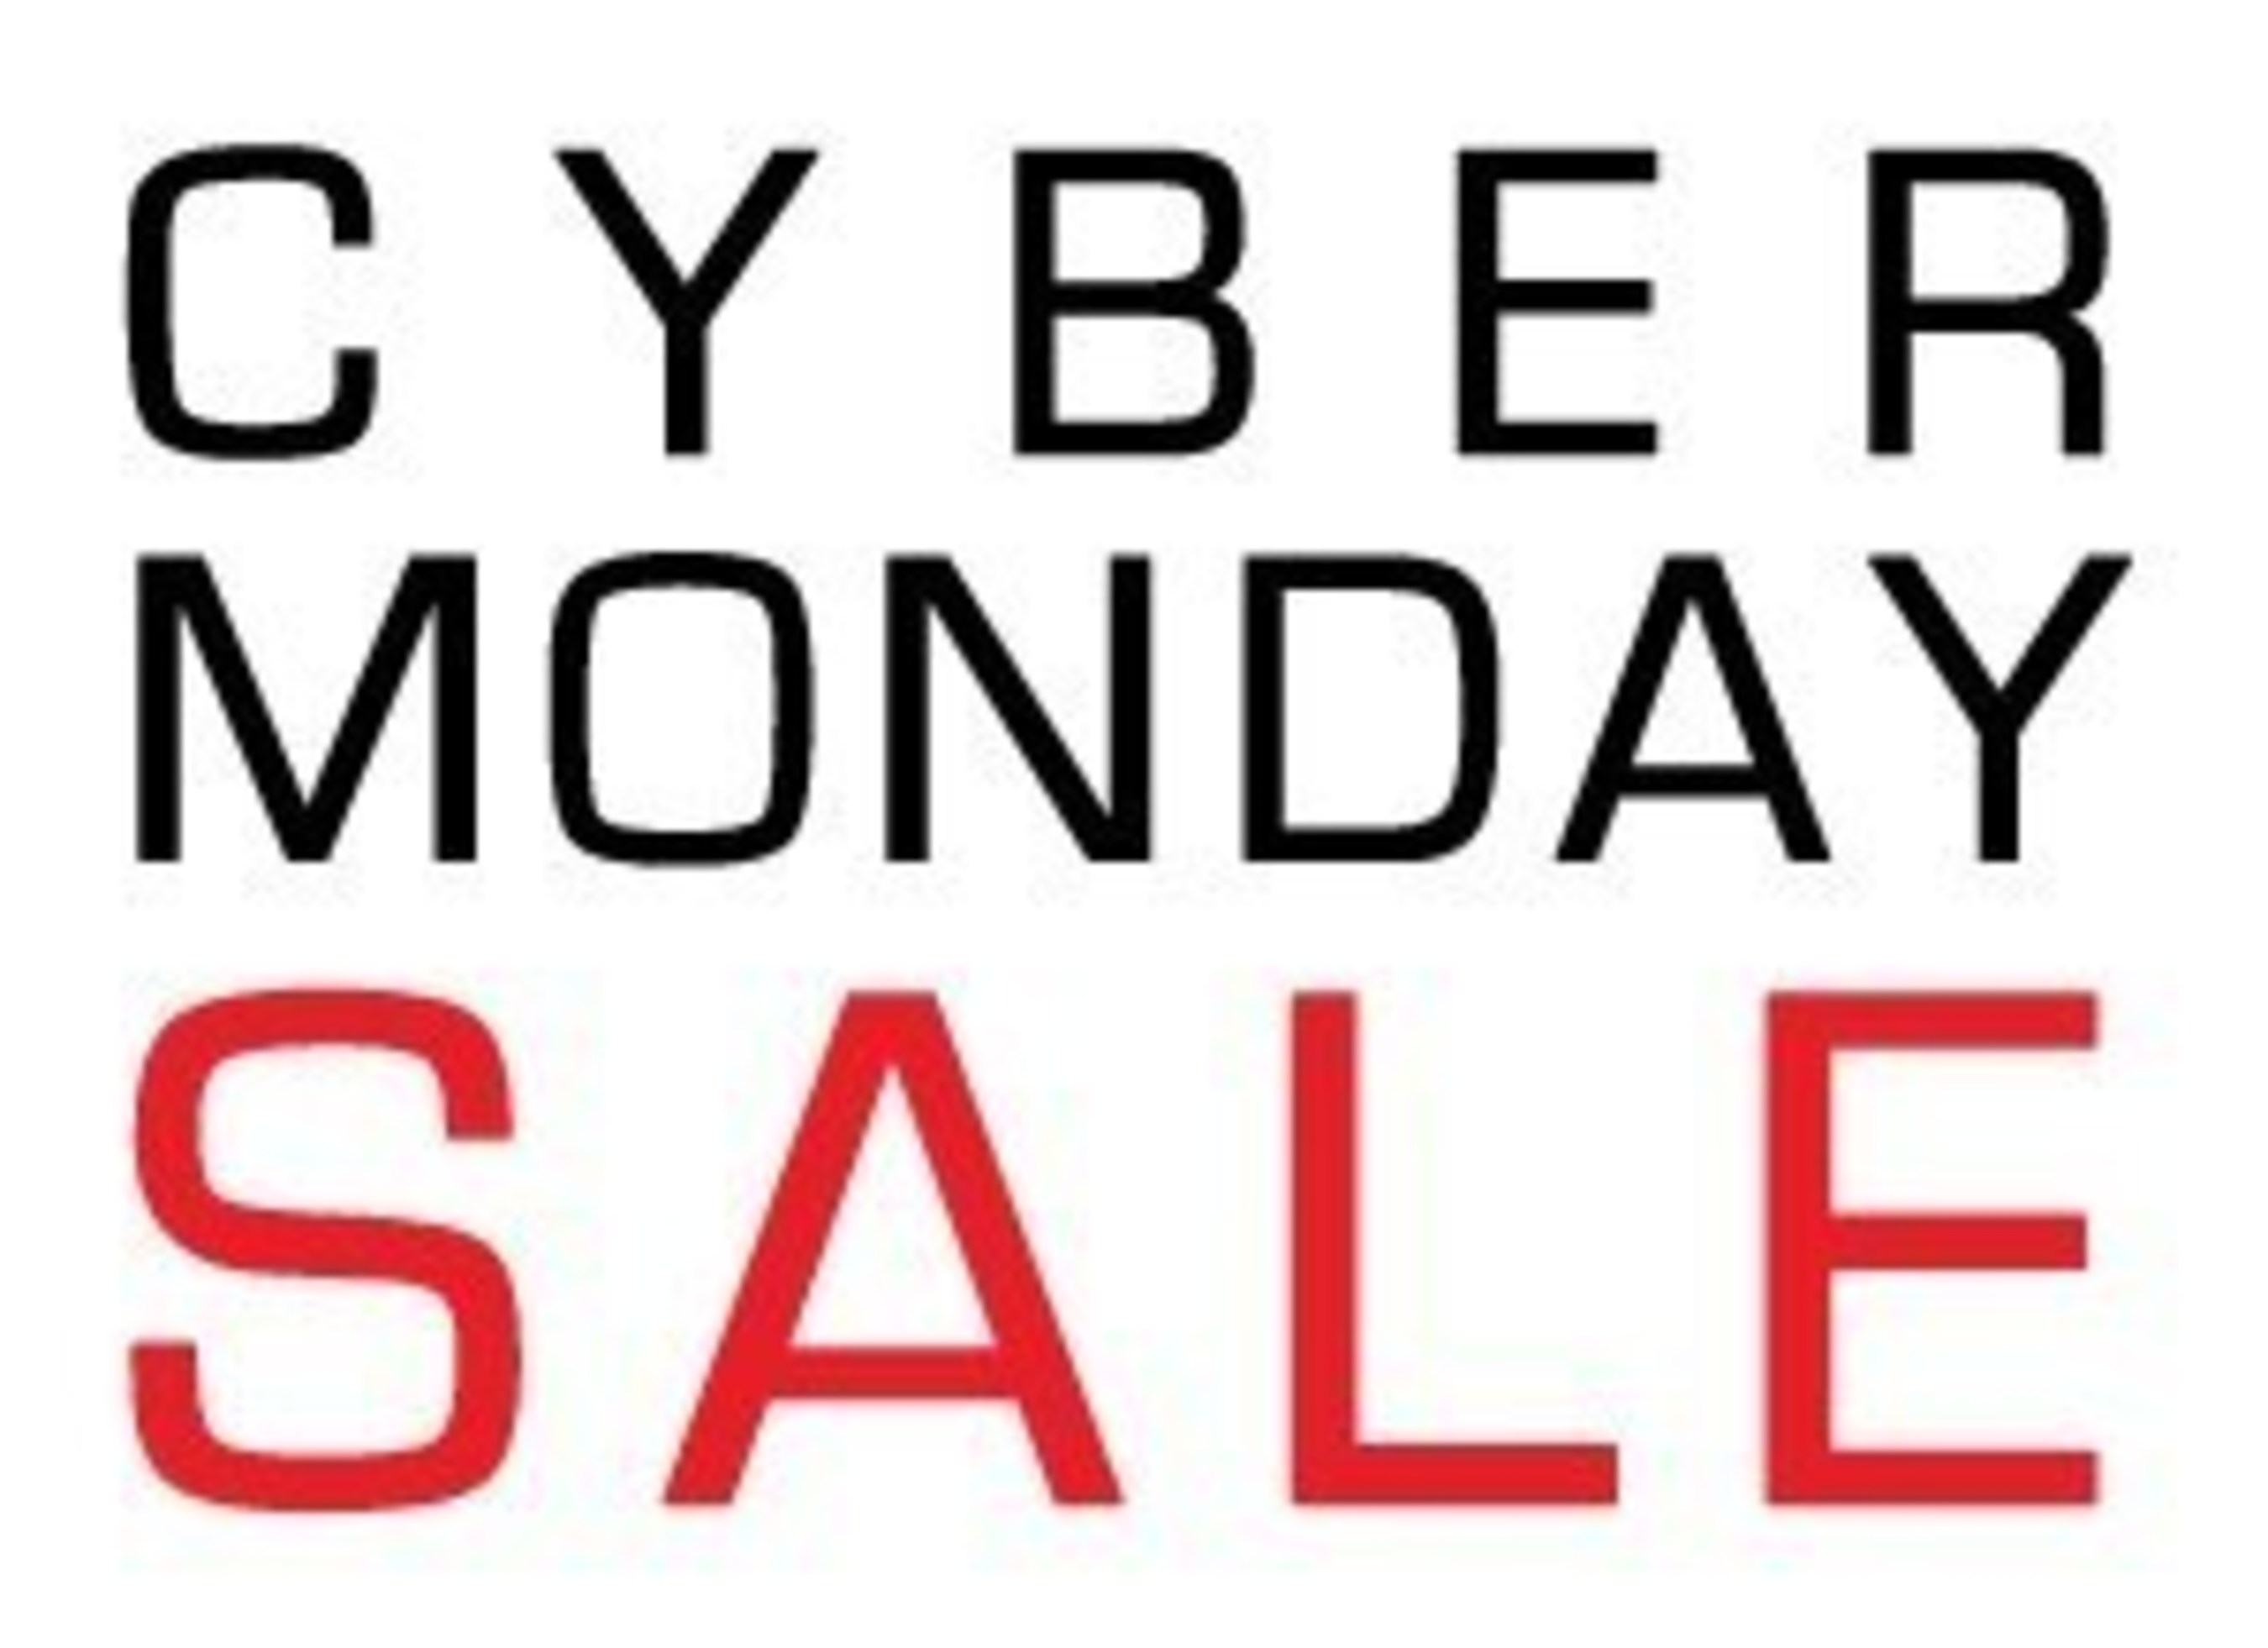 Cyber Monday Deals 2015 at www.speedy25.com Top 5 List for the Best Deals on Laptops, TVs, Cameras,